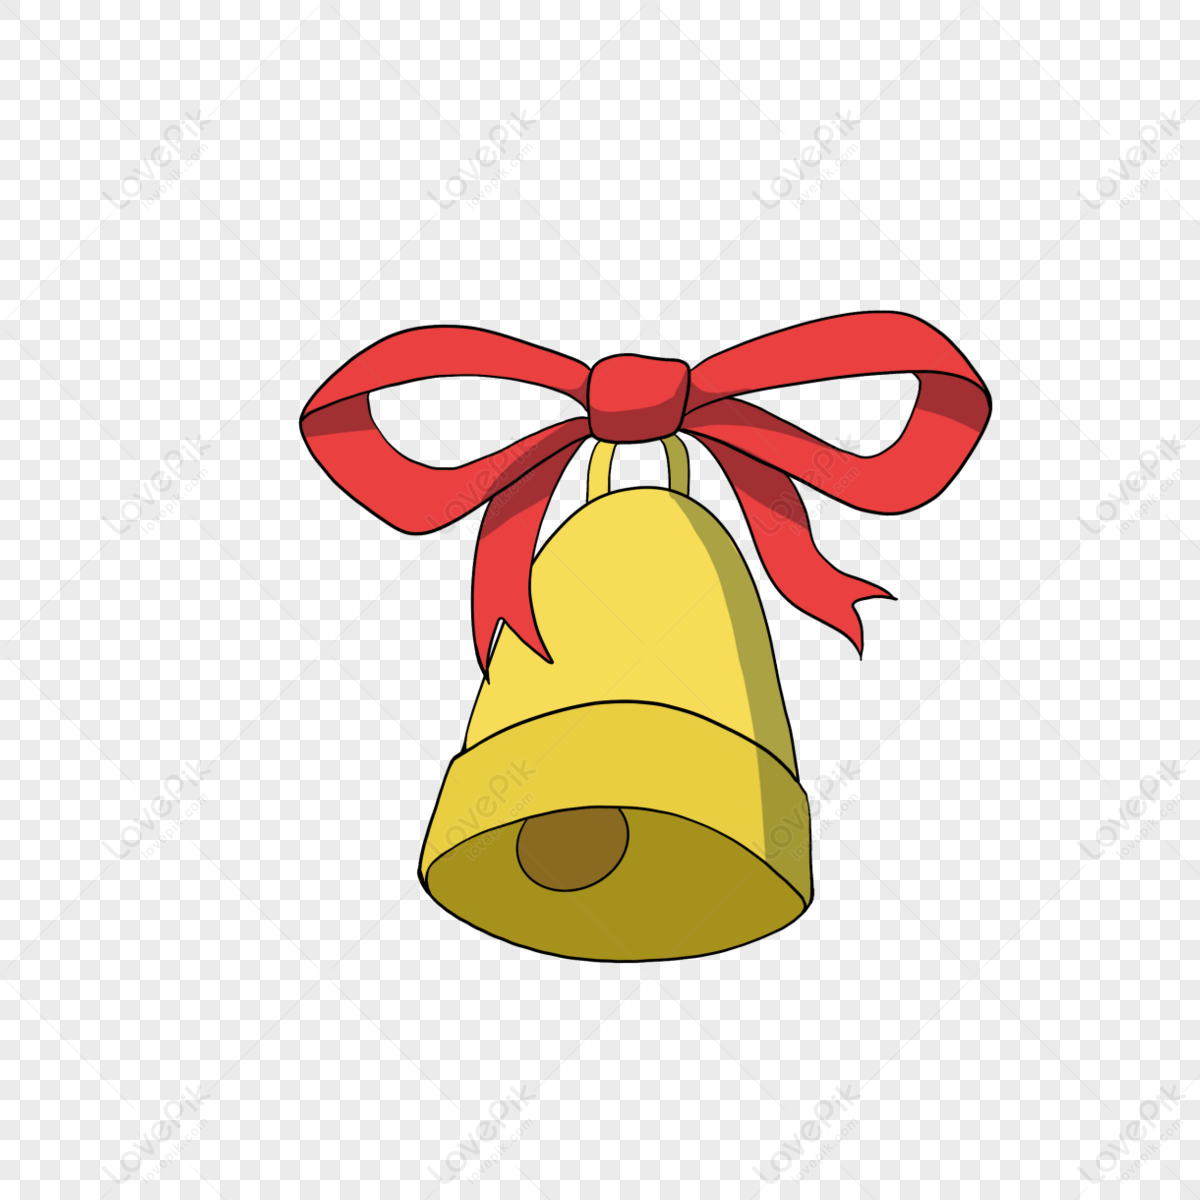 Christmas Bell White Transparent, Christmas Cartoon Bell, Holiday, Christmas,  Hand Draw PNG Image For Free Download